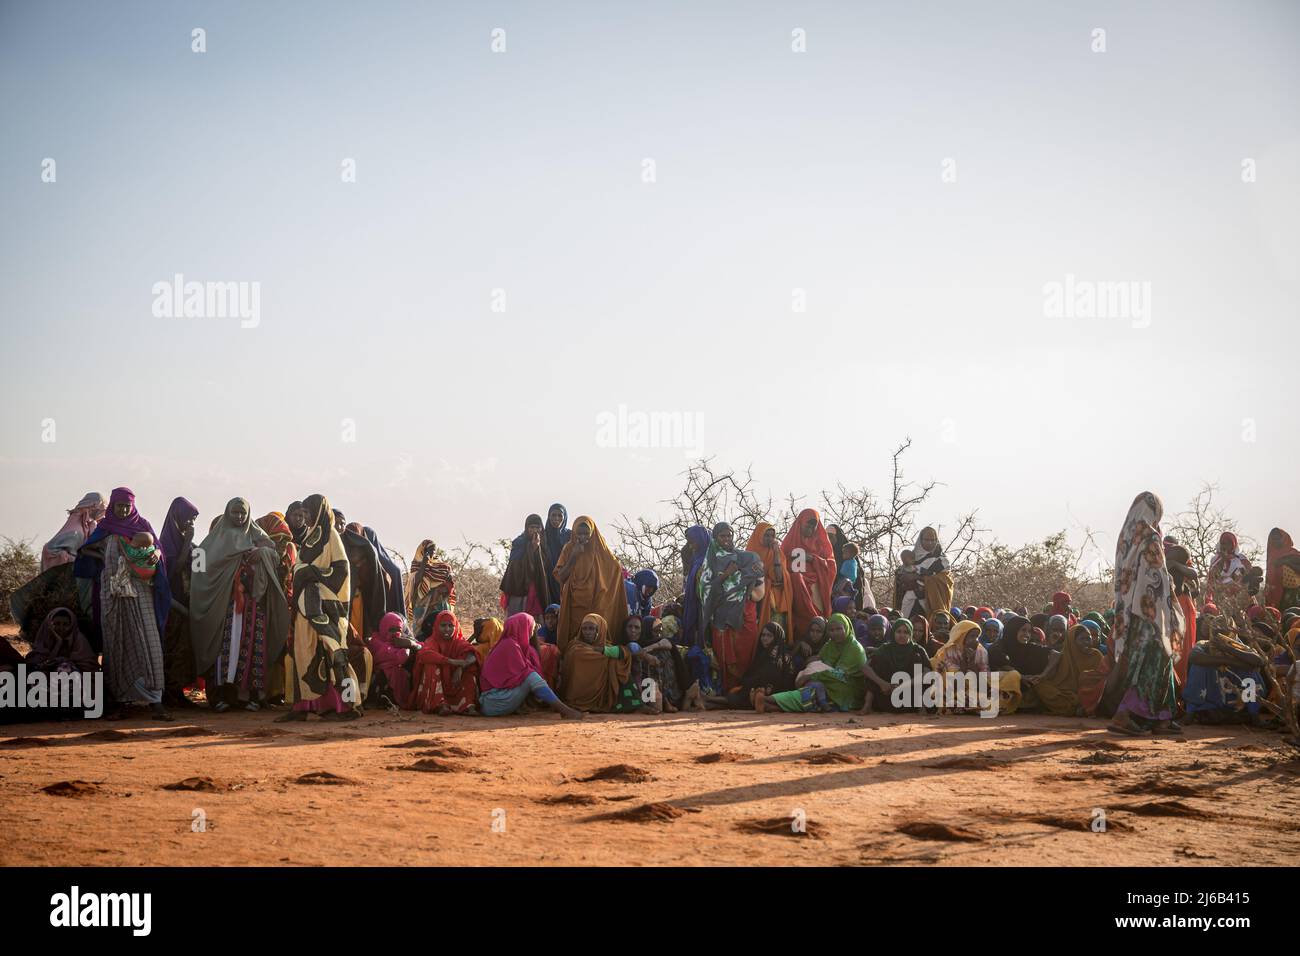 Nearly 300 people, mostly women and children, right after they arrived in Qansahley camp in Dollow, Jubaland, Somalia, after being displaced by drought. Stock Photo